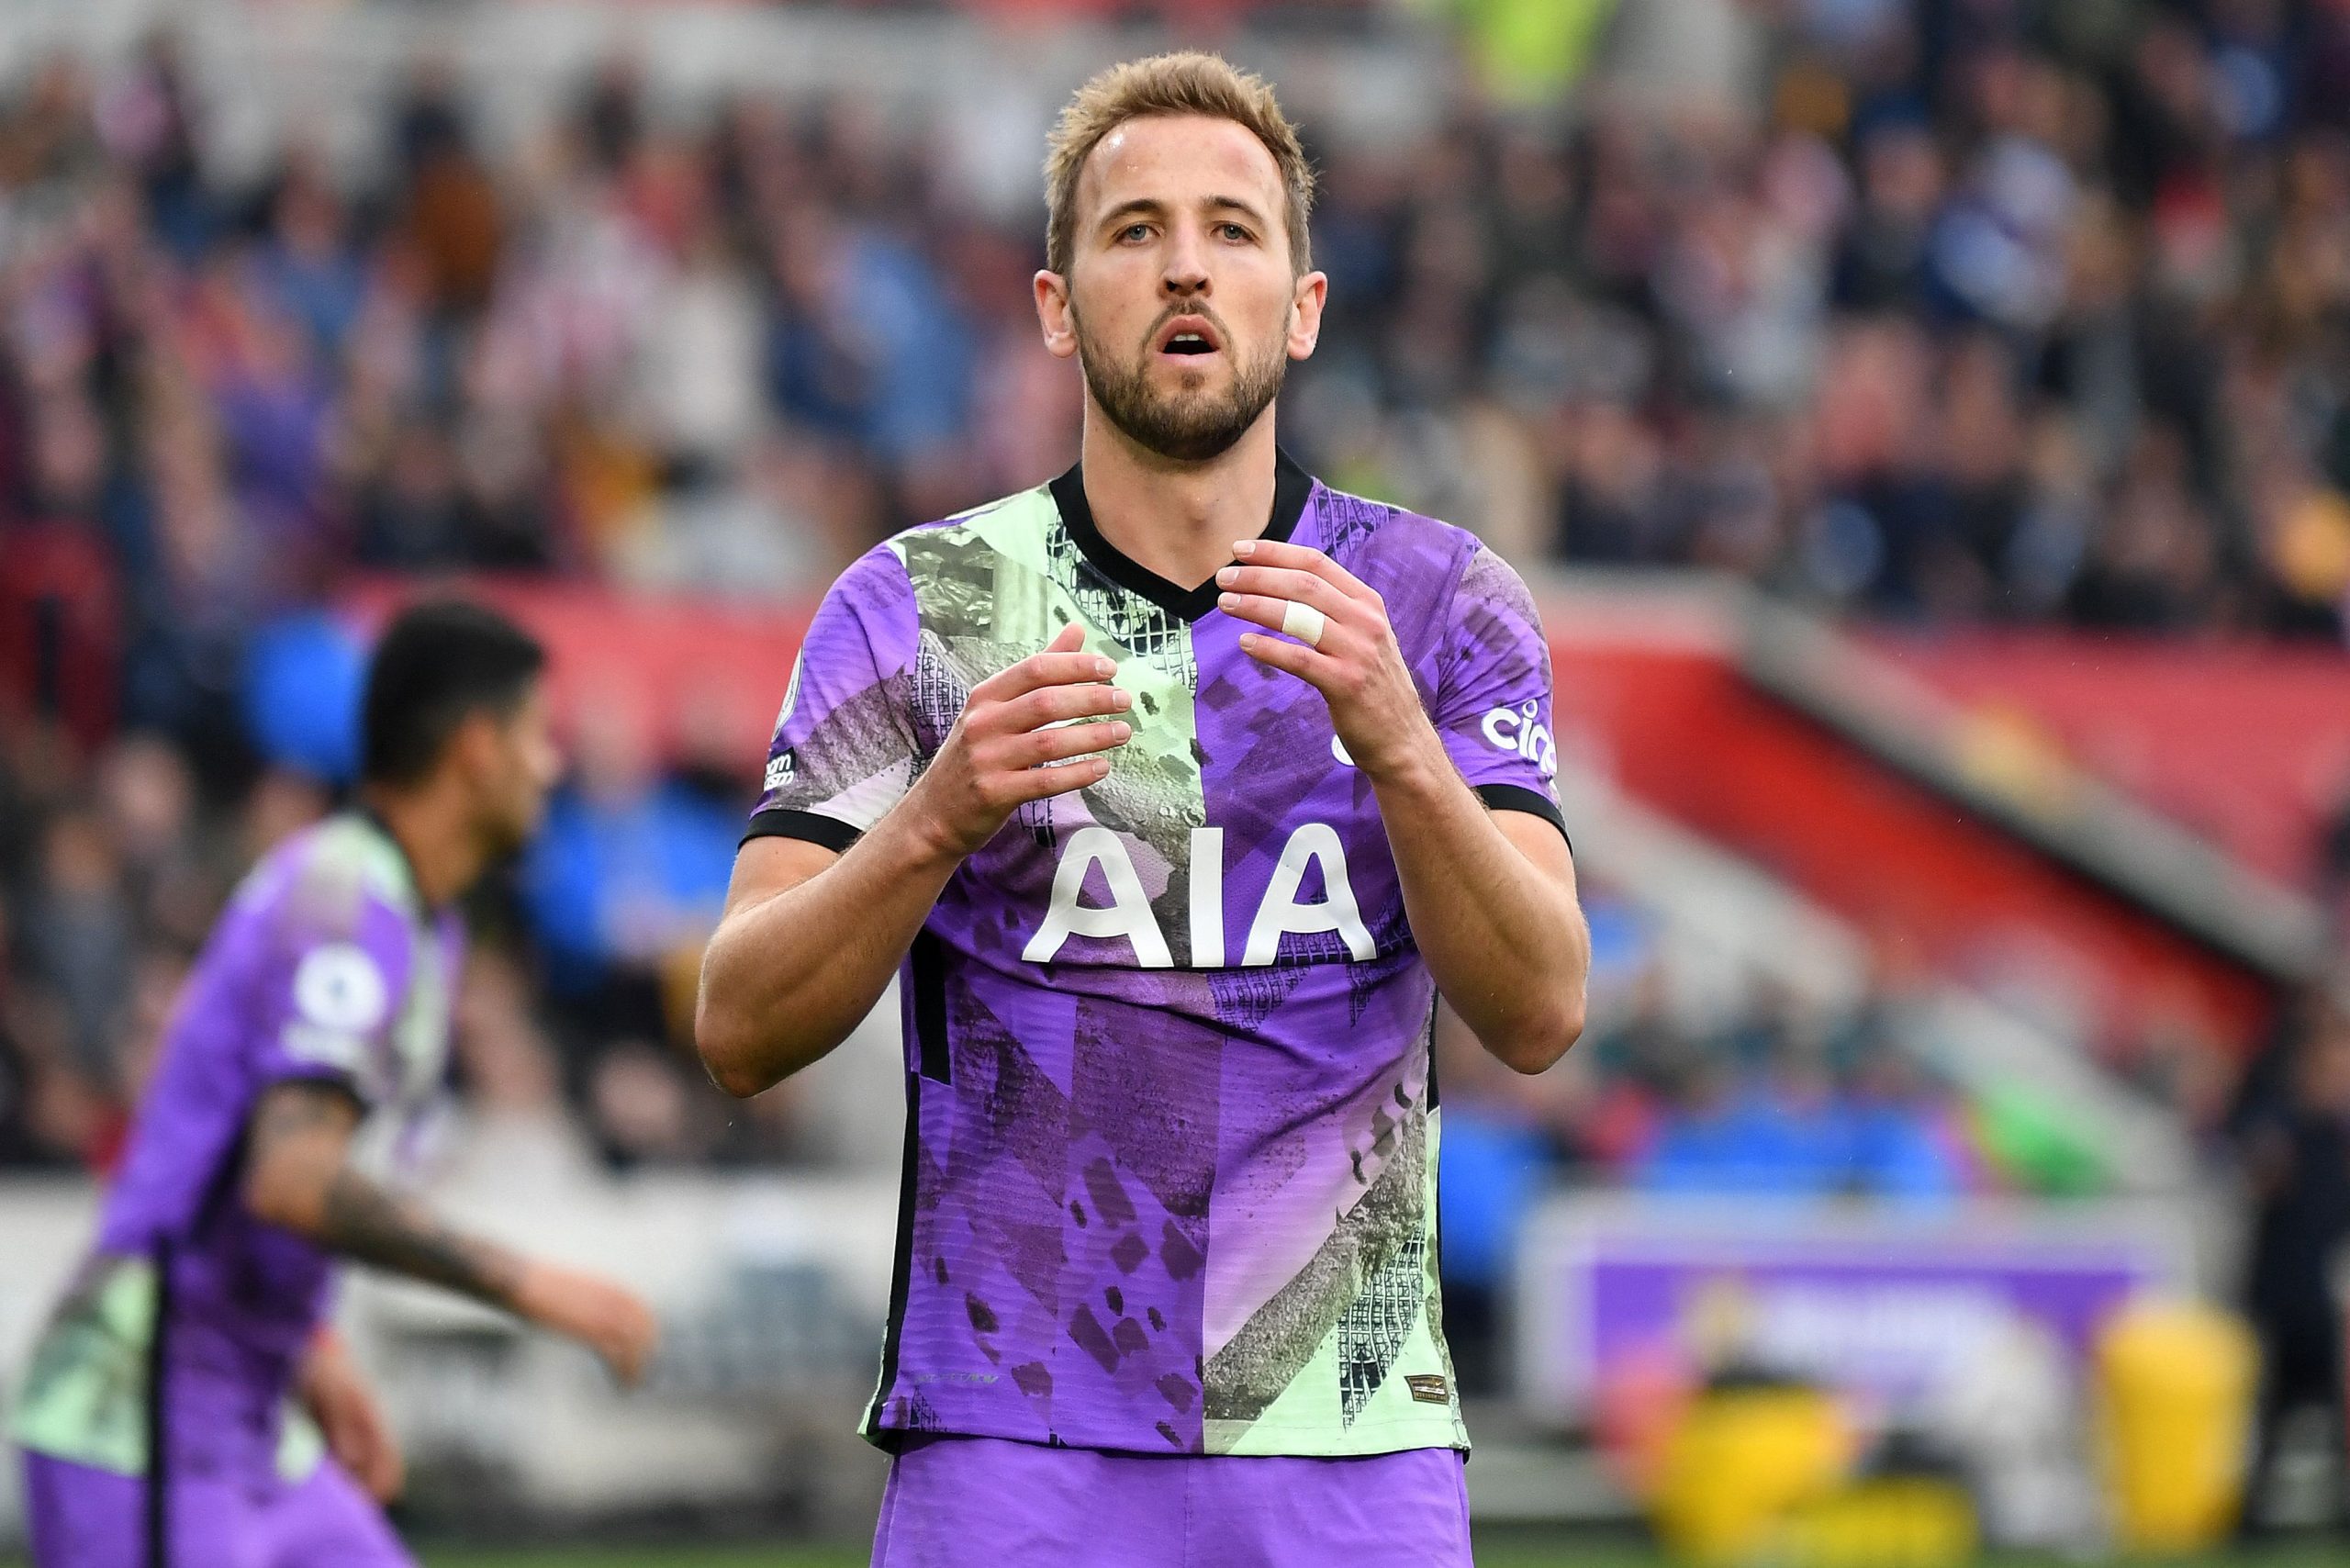 Harry Kane believes Tottenham Hotspur will have to win all remaining matches if they are to finish in fourth place.